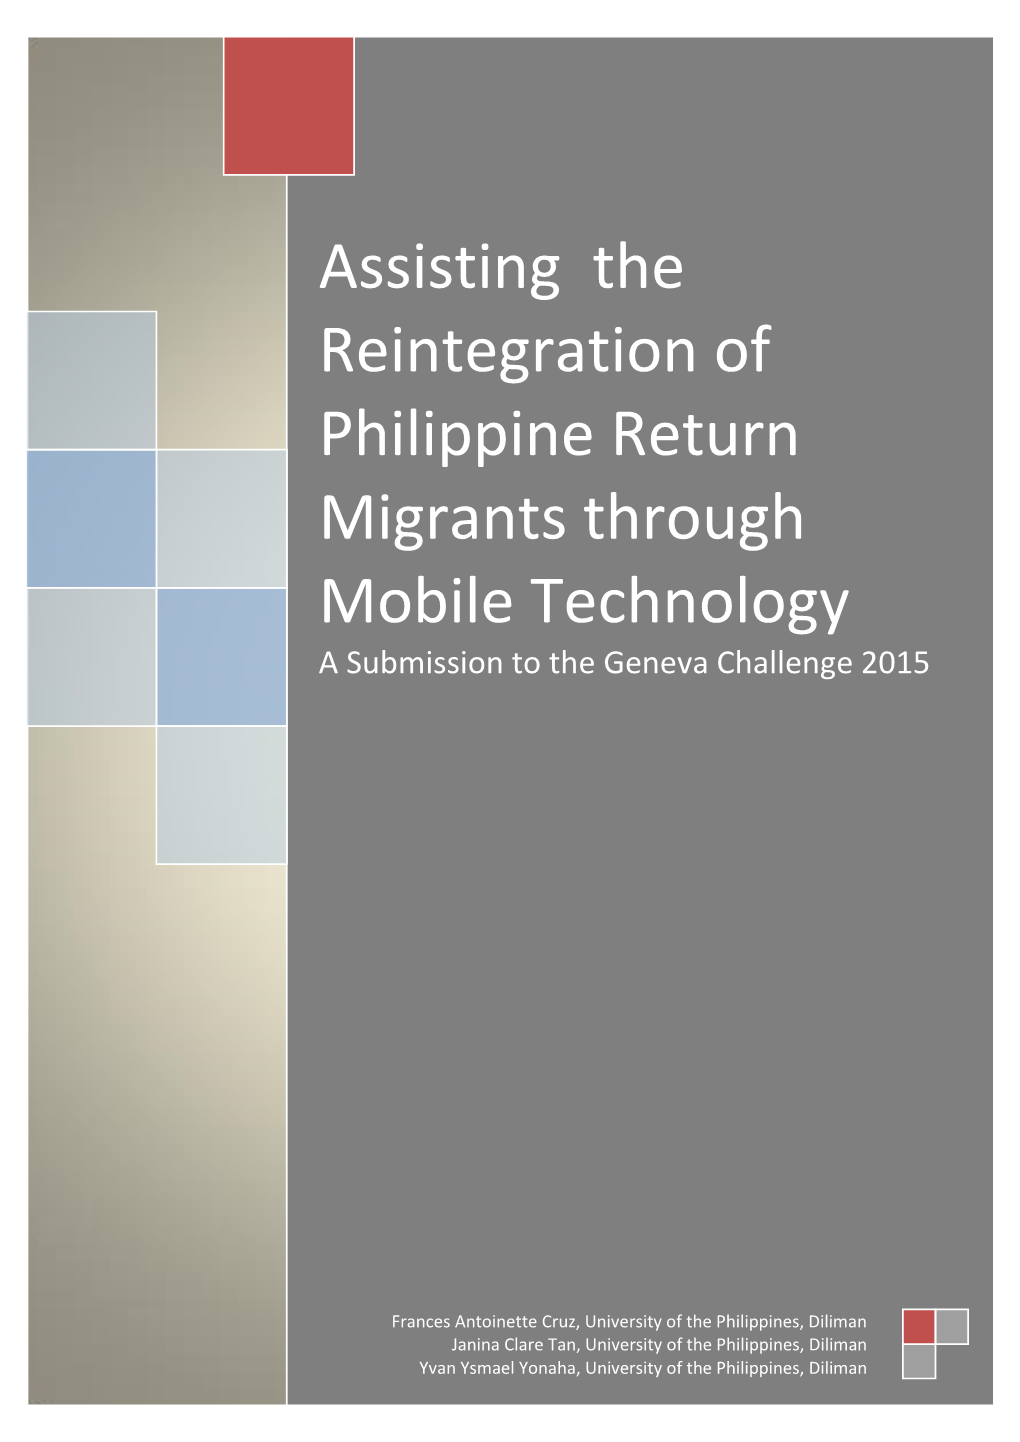 Assisting the Reintegration of Philippine Return Migrants Through Mobile Technology a Submission to the Geneva Challenge 2015